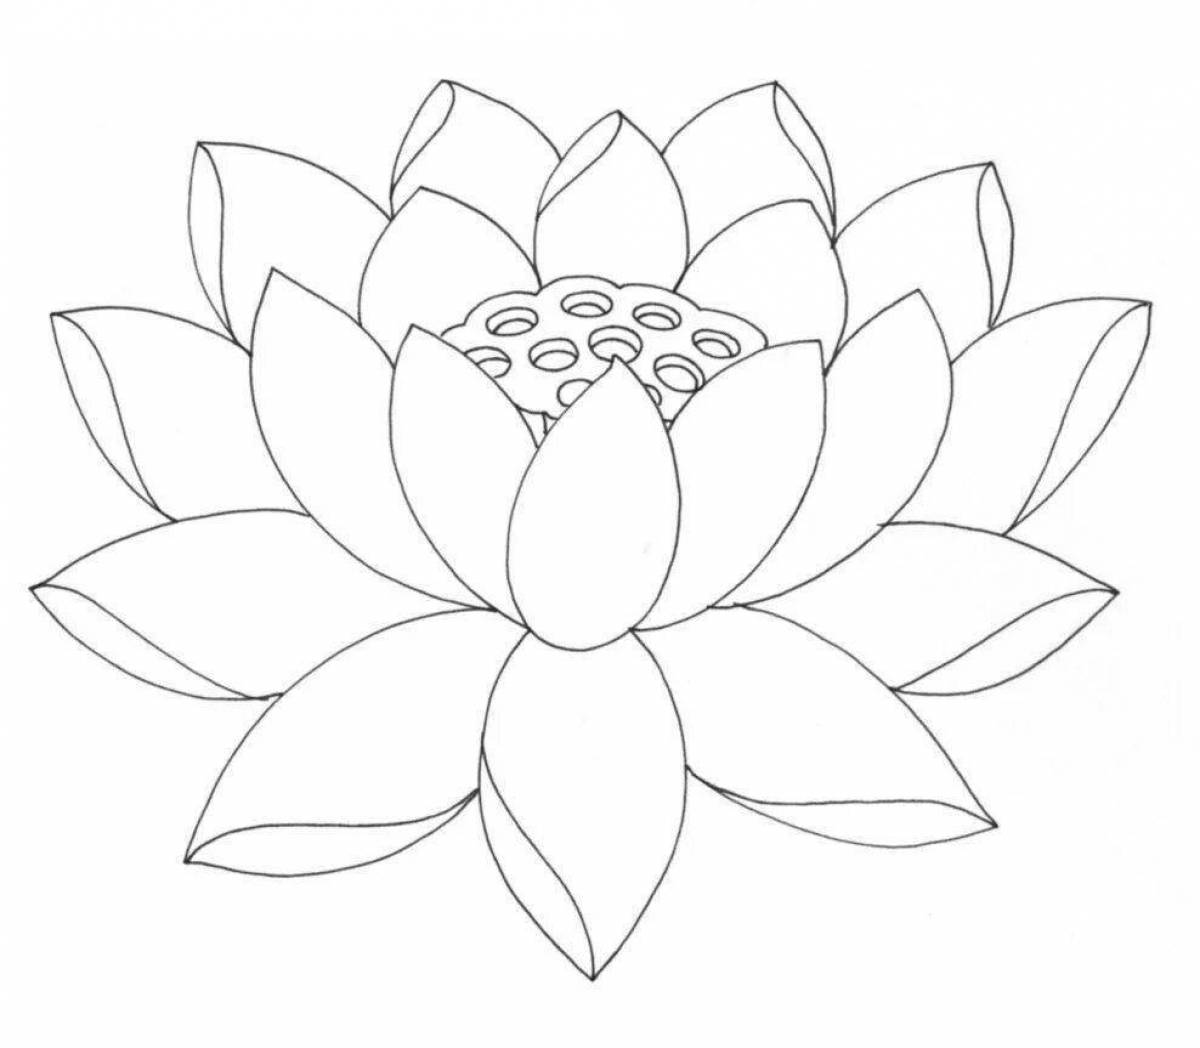 Sweet stone flower coloring book for kids